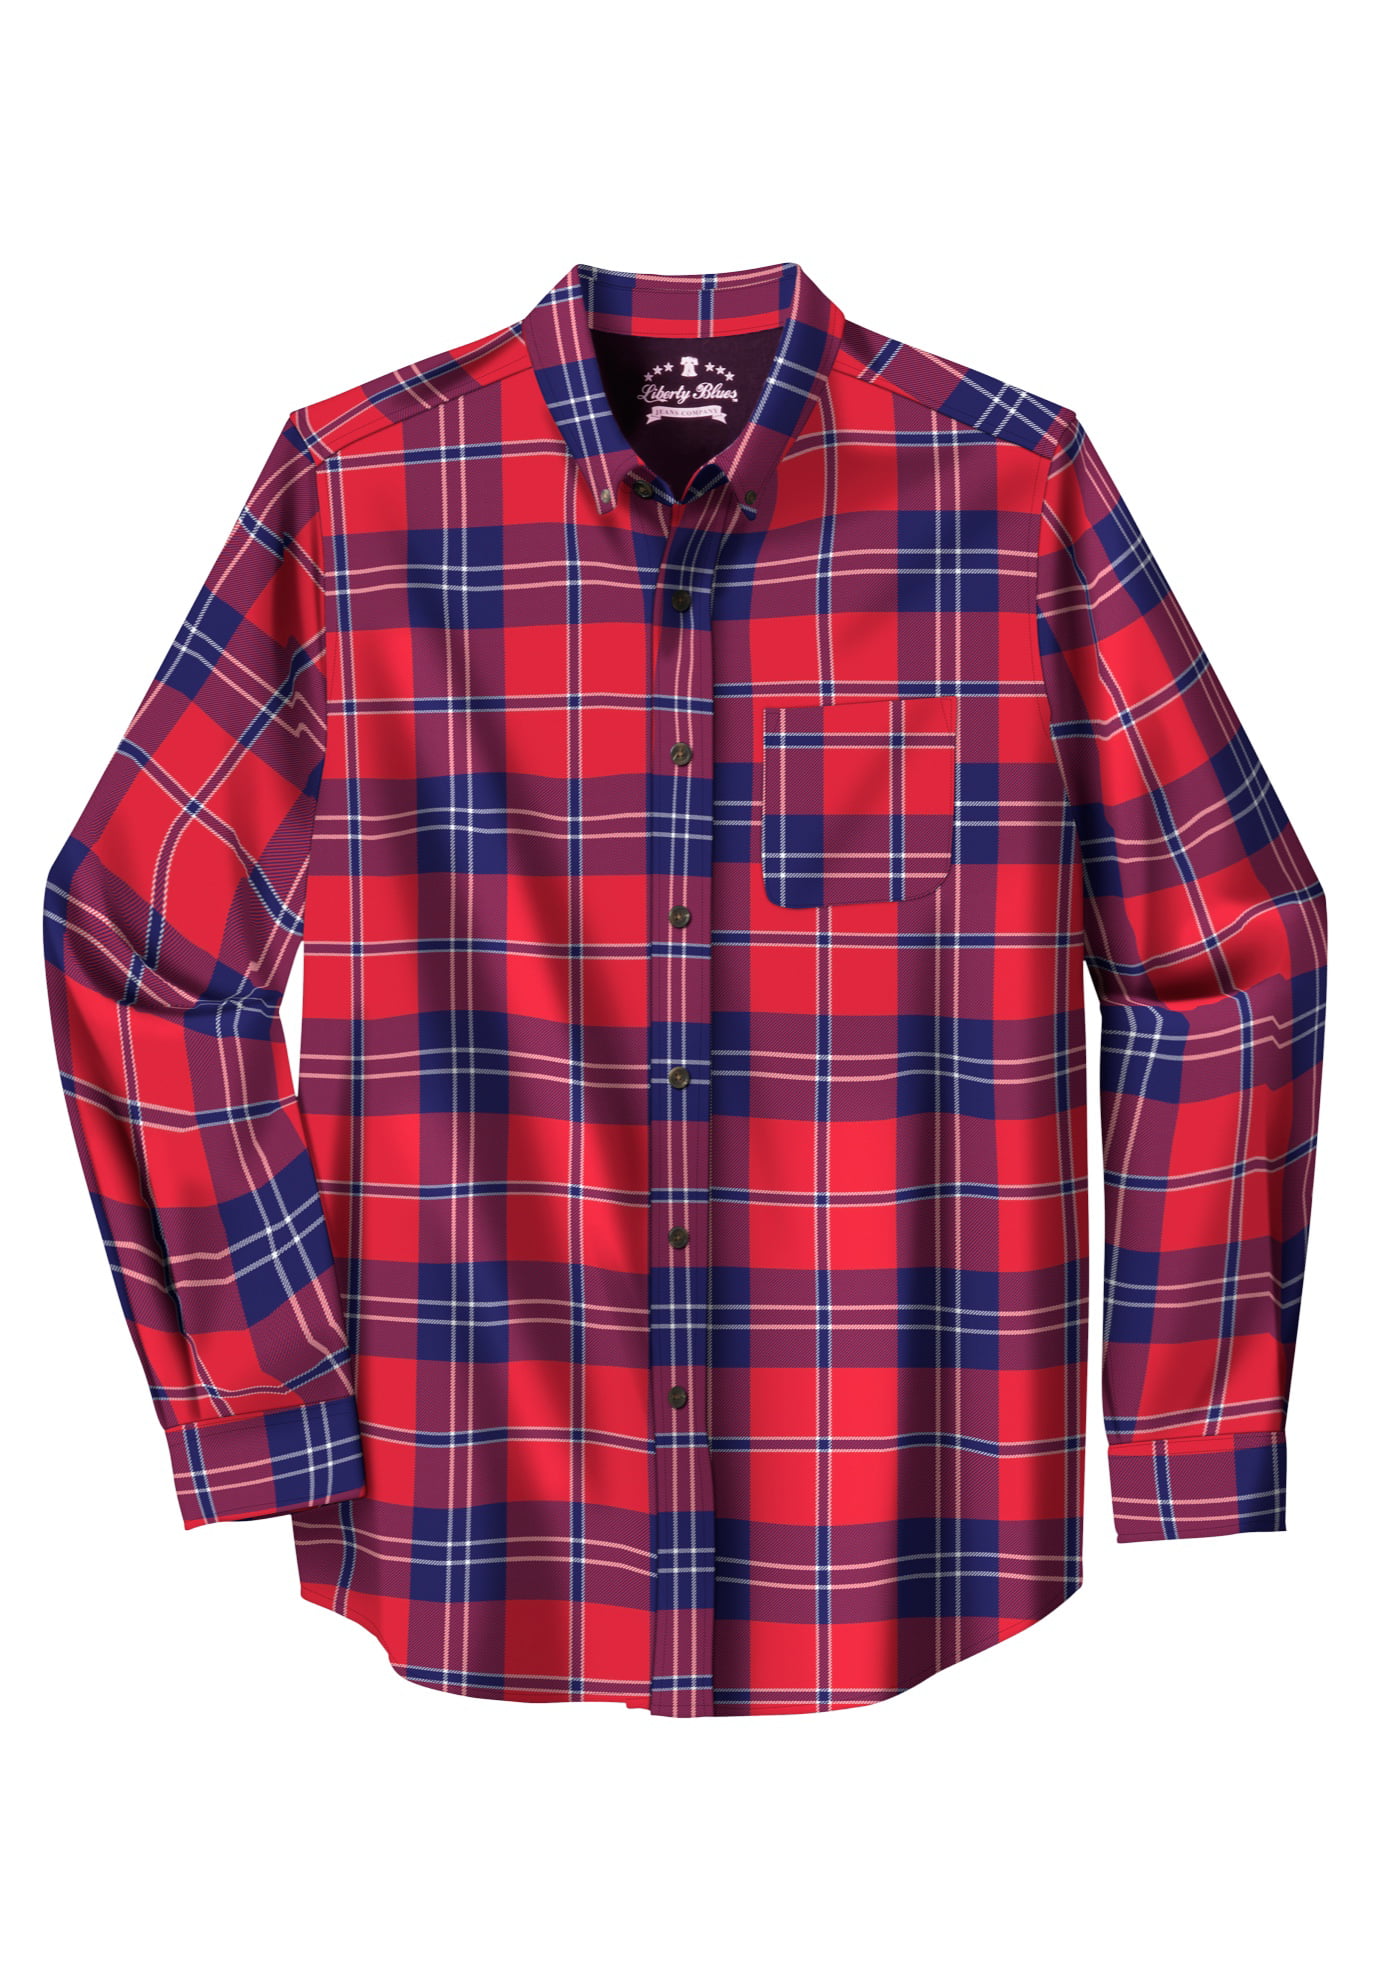 Mens Liberty Blues 100% Cotton Flannel Shirt Red NIP Heavy Weight BIG Sizes